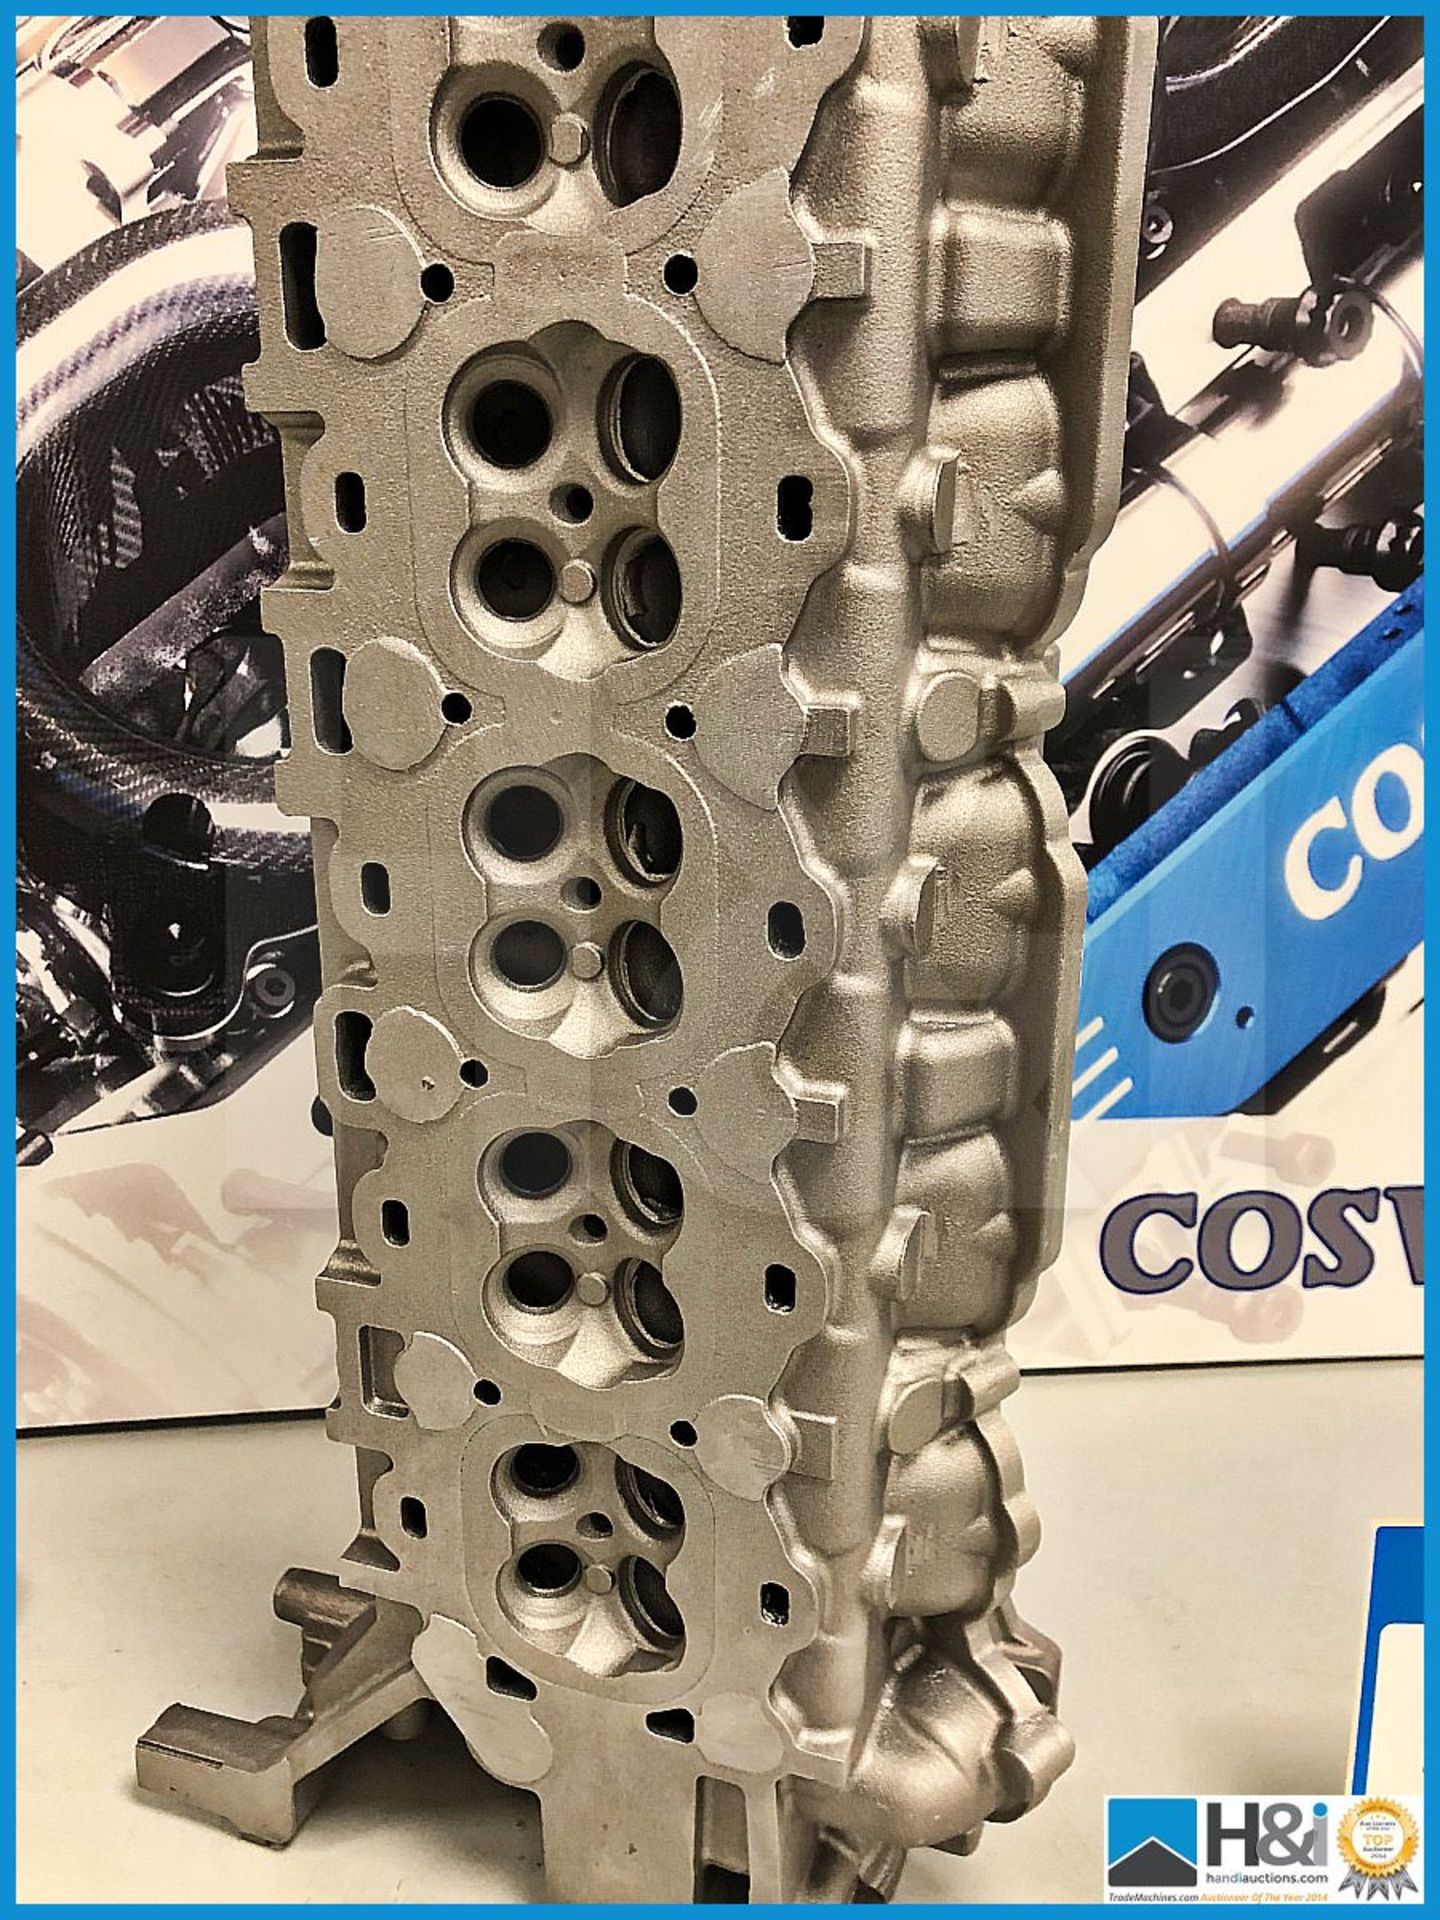 1 x Cosworth V12 JF casting cylinder head LH. Code: 20015566. Lot 224 - Image 4 of 4